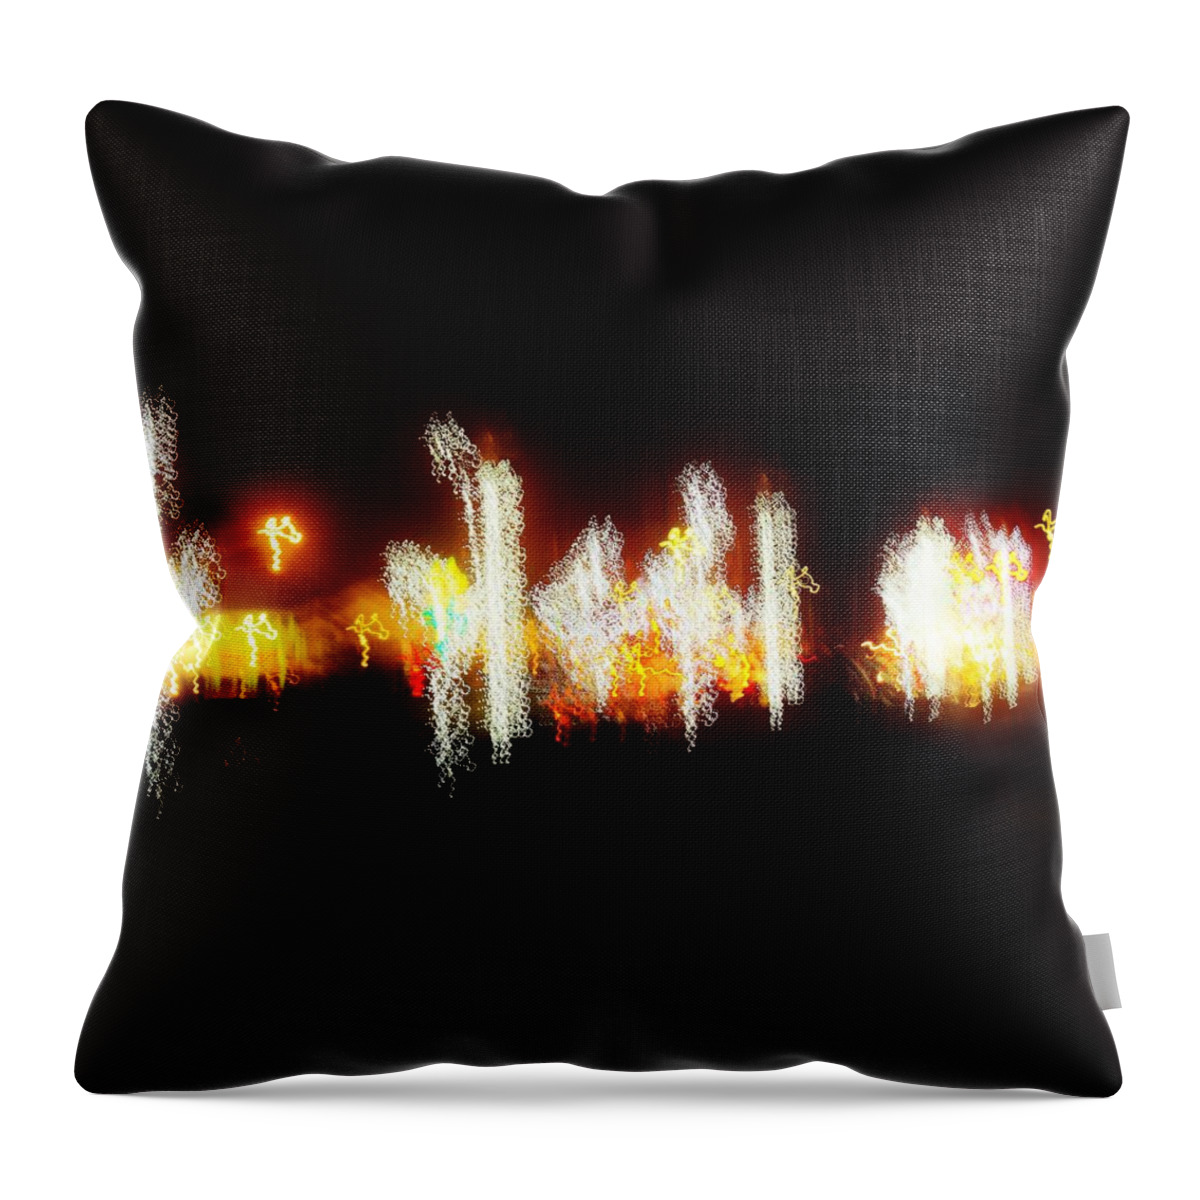  Throw Pillow featuring the photograph Woodhaven Light Waves by Daniel Thompson